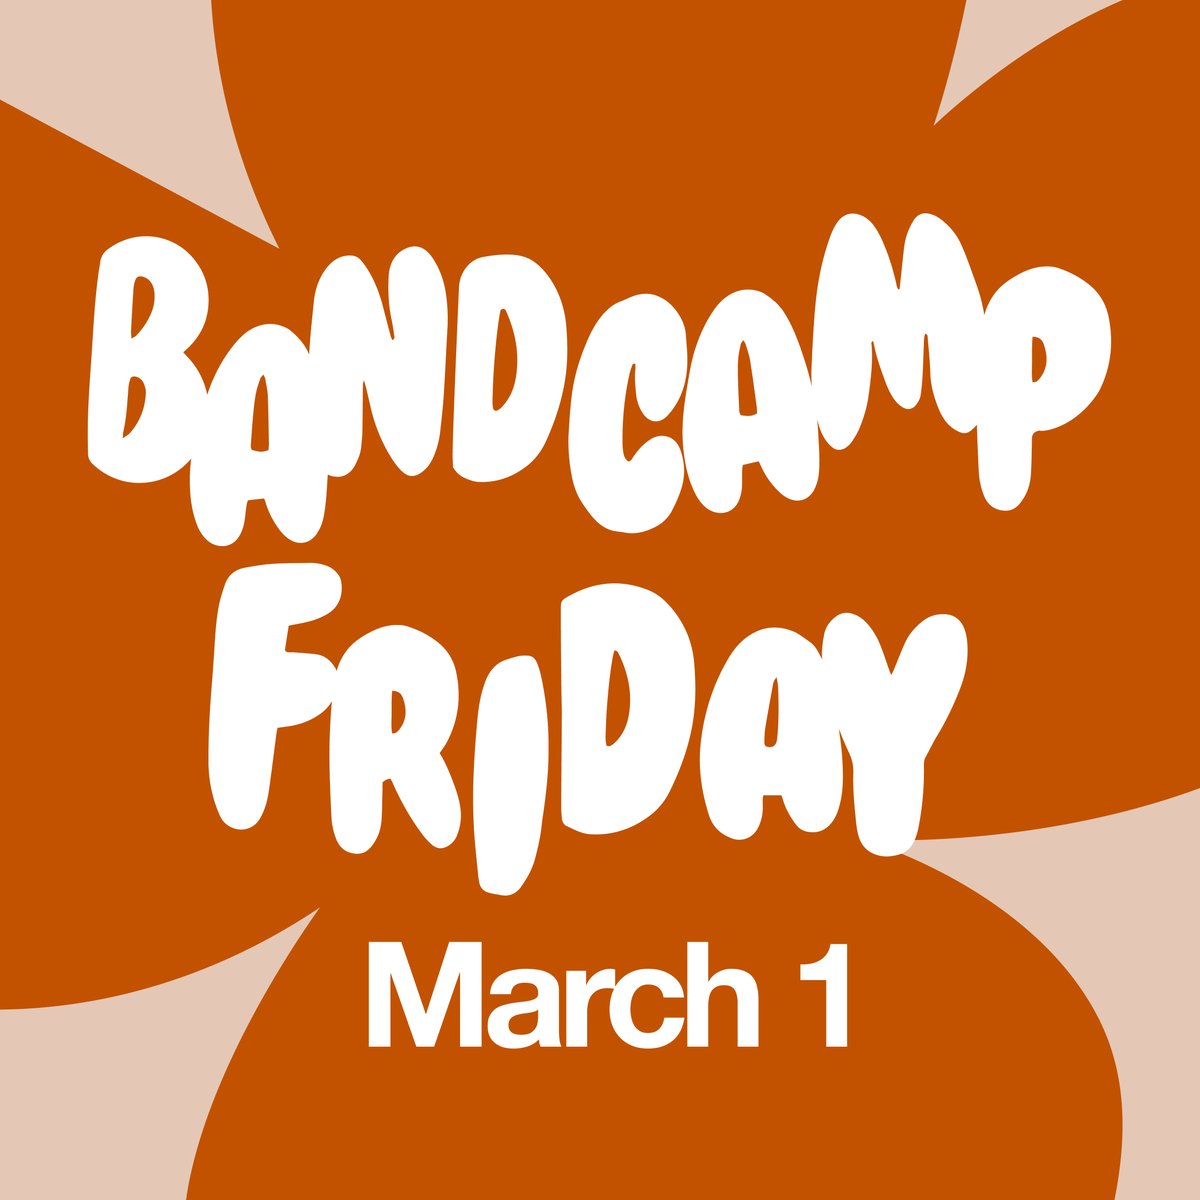 This Friday is Bandcamp Friday.